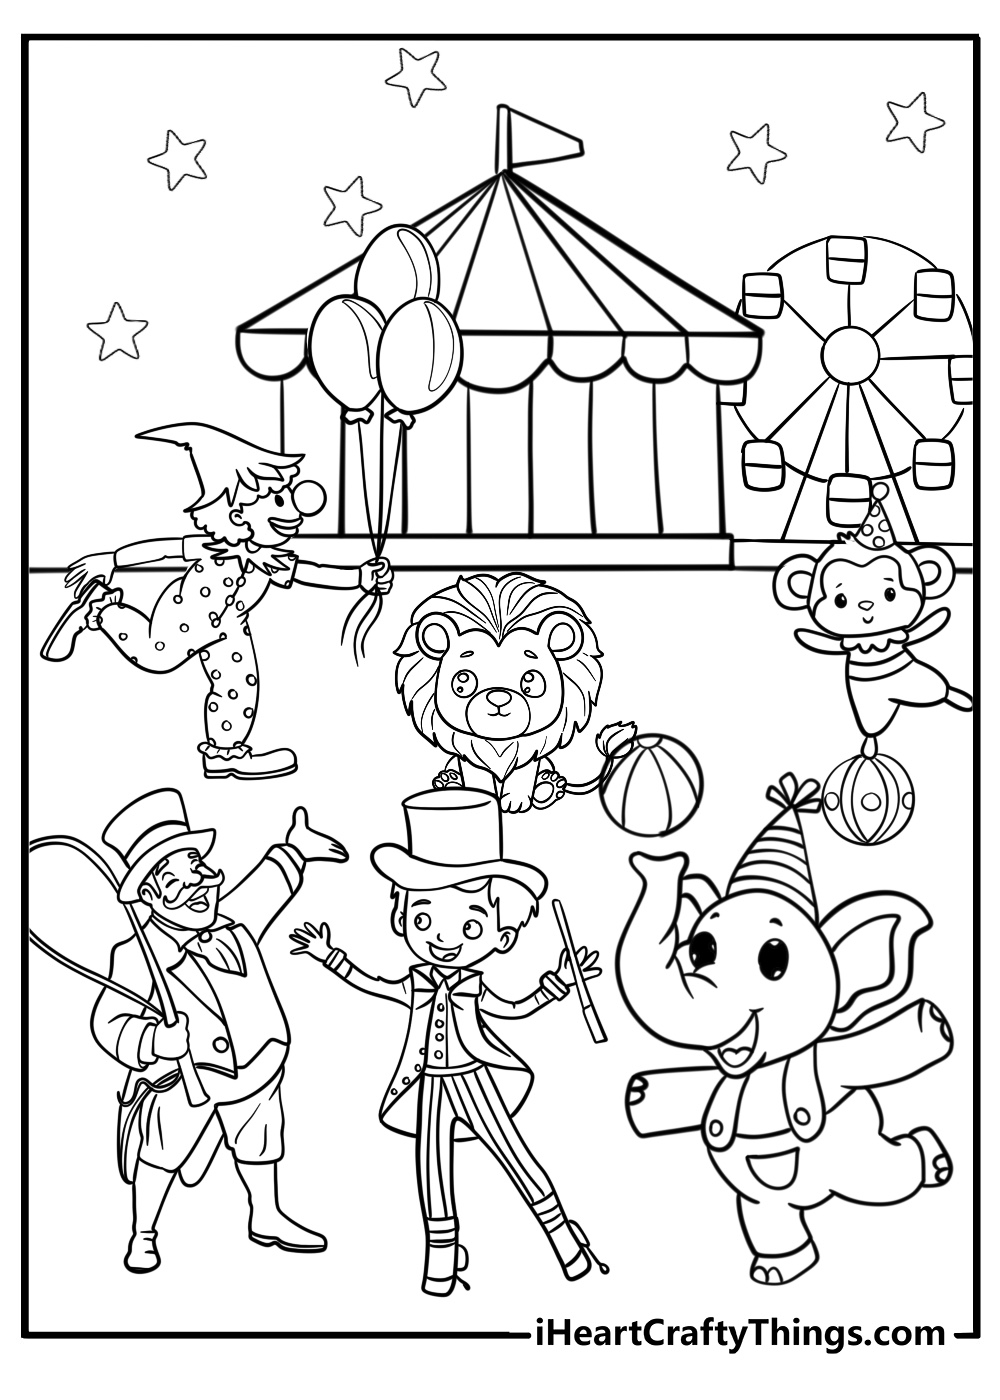 Easy circus coloring page with clowns magicians ringmaster lion elephant and monkey